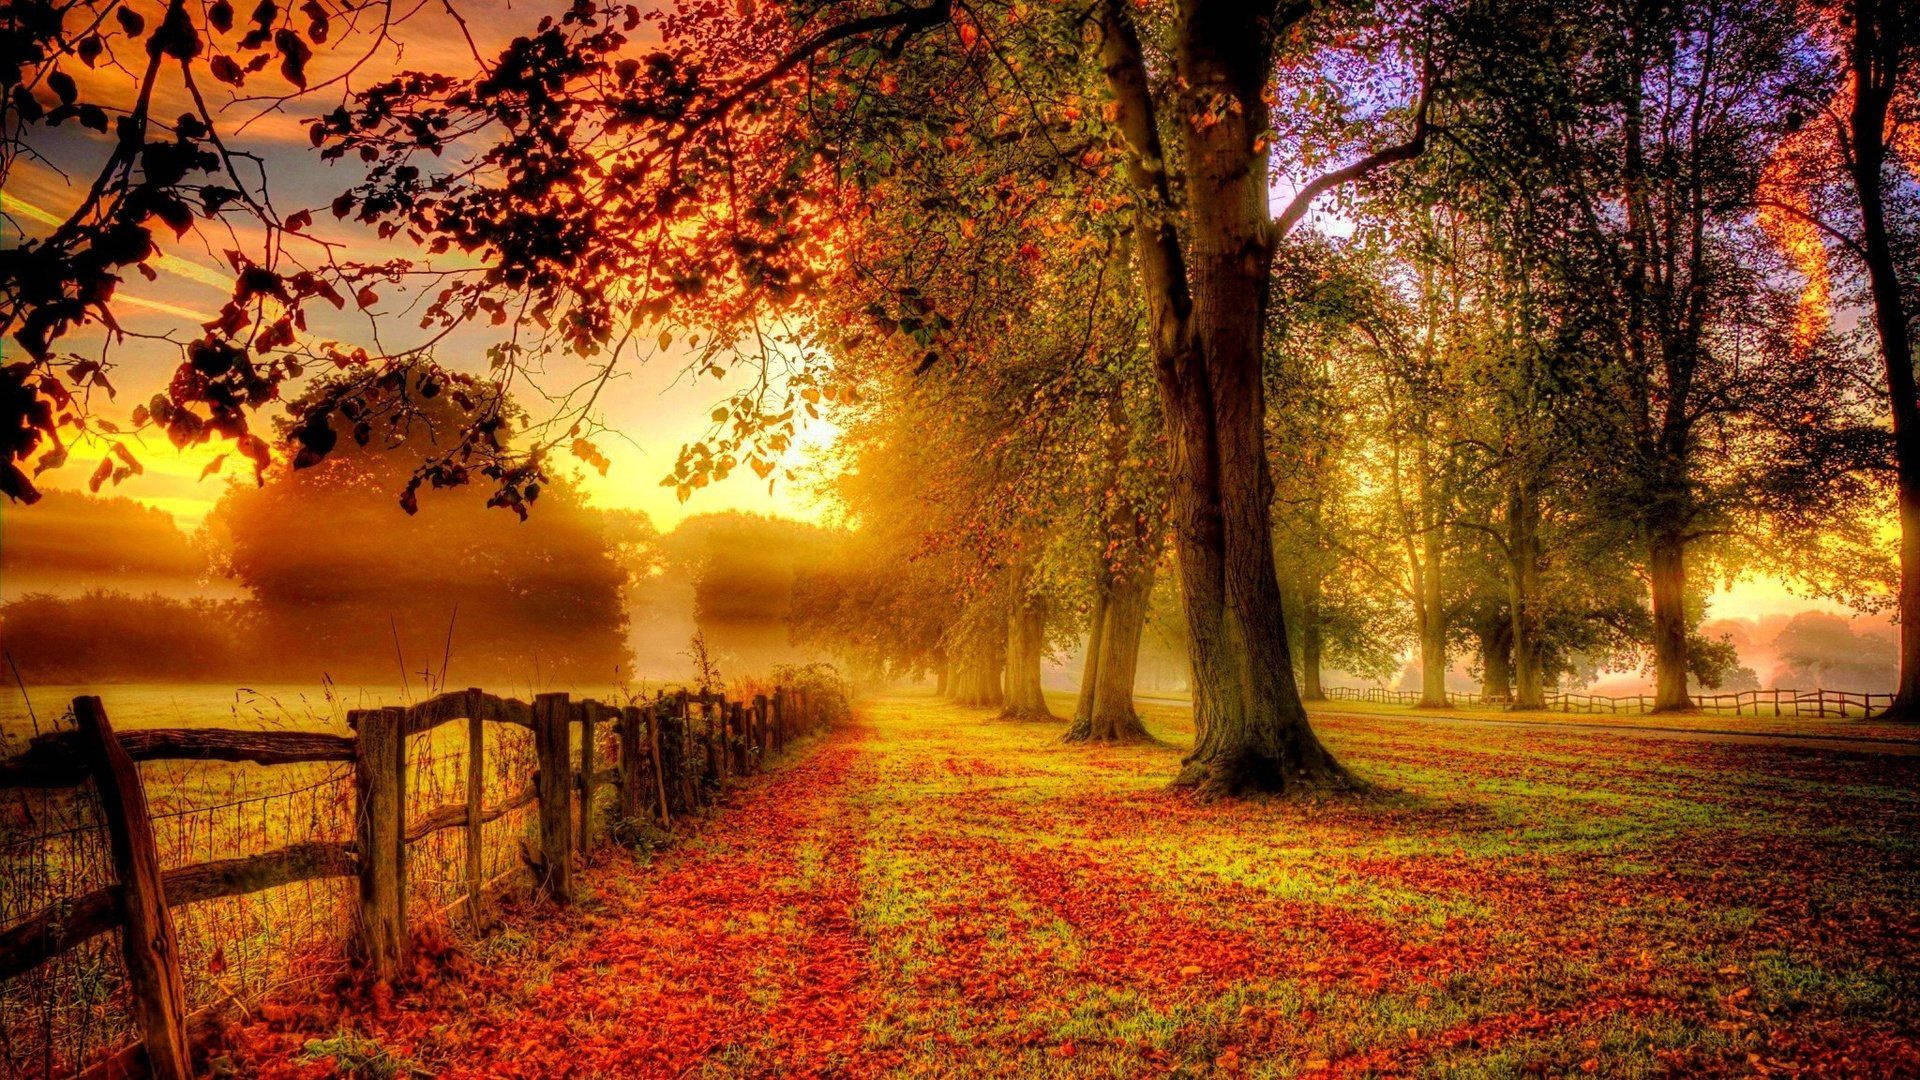 A Beautiful Country Road Illuminated By A Vibrant Autumn Sunset Background